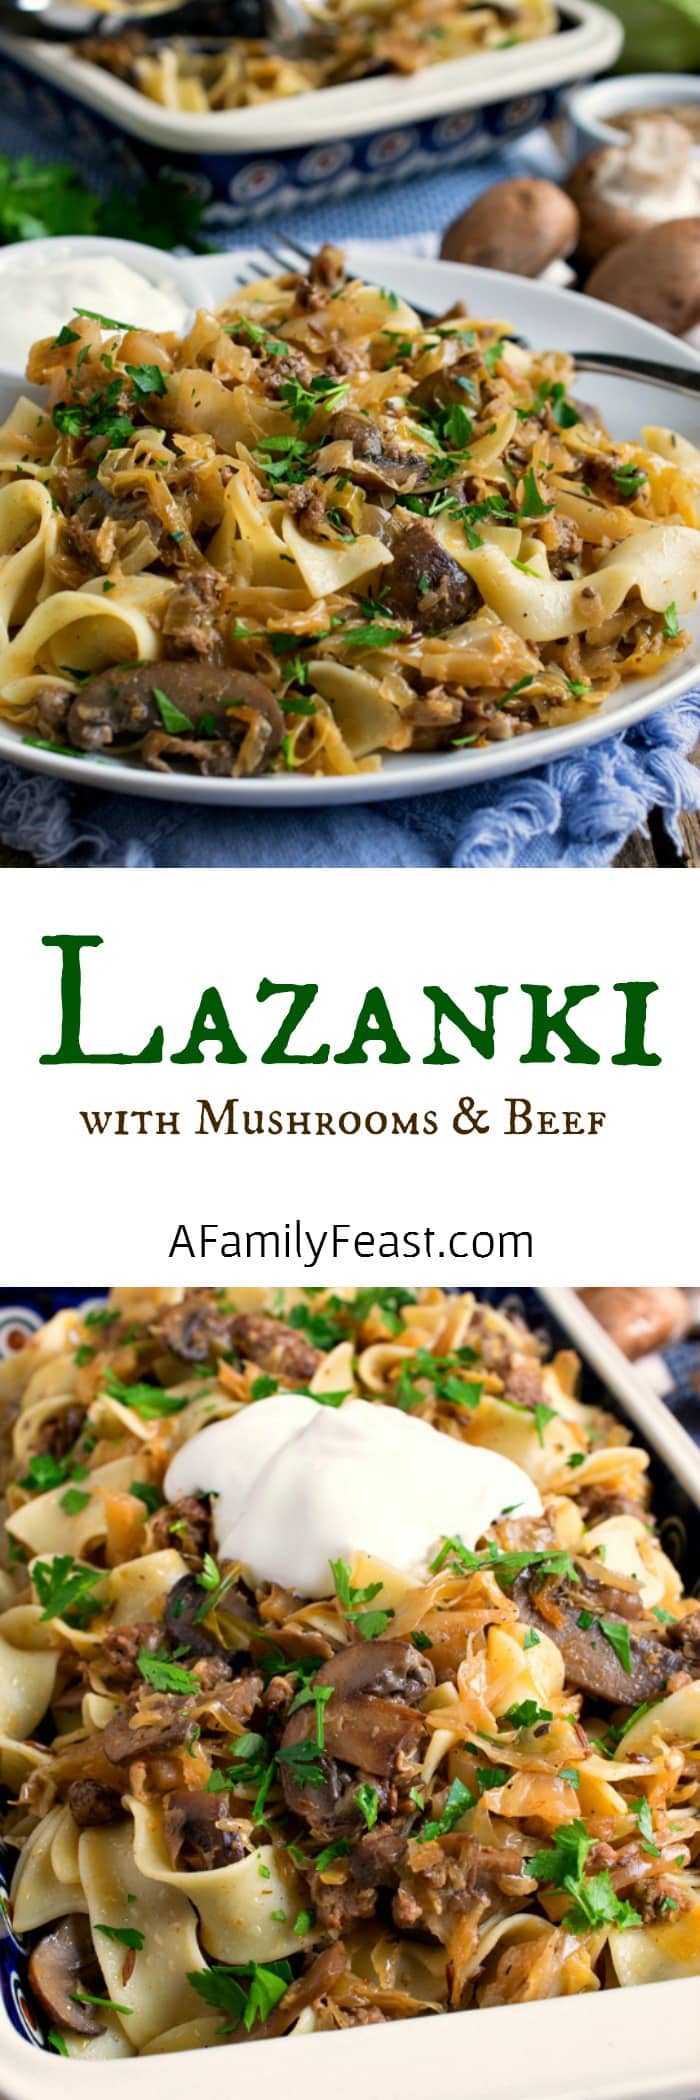 Lazanki with Mushrooms and Beef - Noodles tossed with sauteed ground beef, mushrooms, and sauerkraut and topped with sour cream. A classic Polish dish.